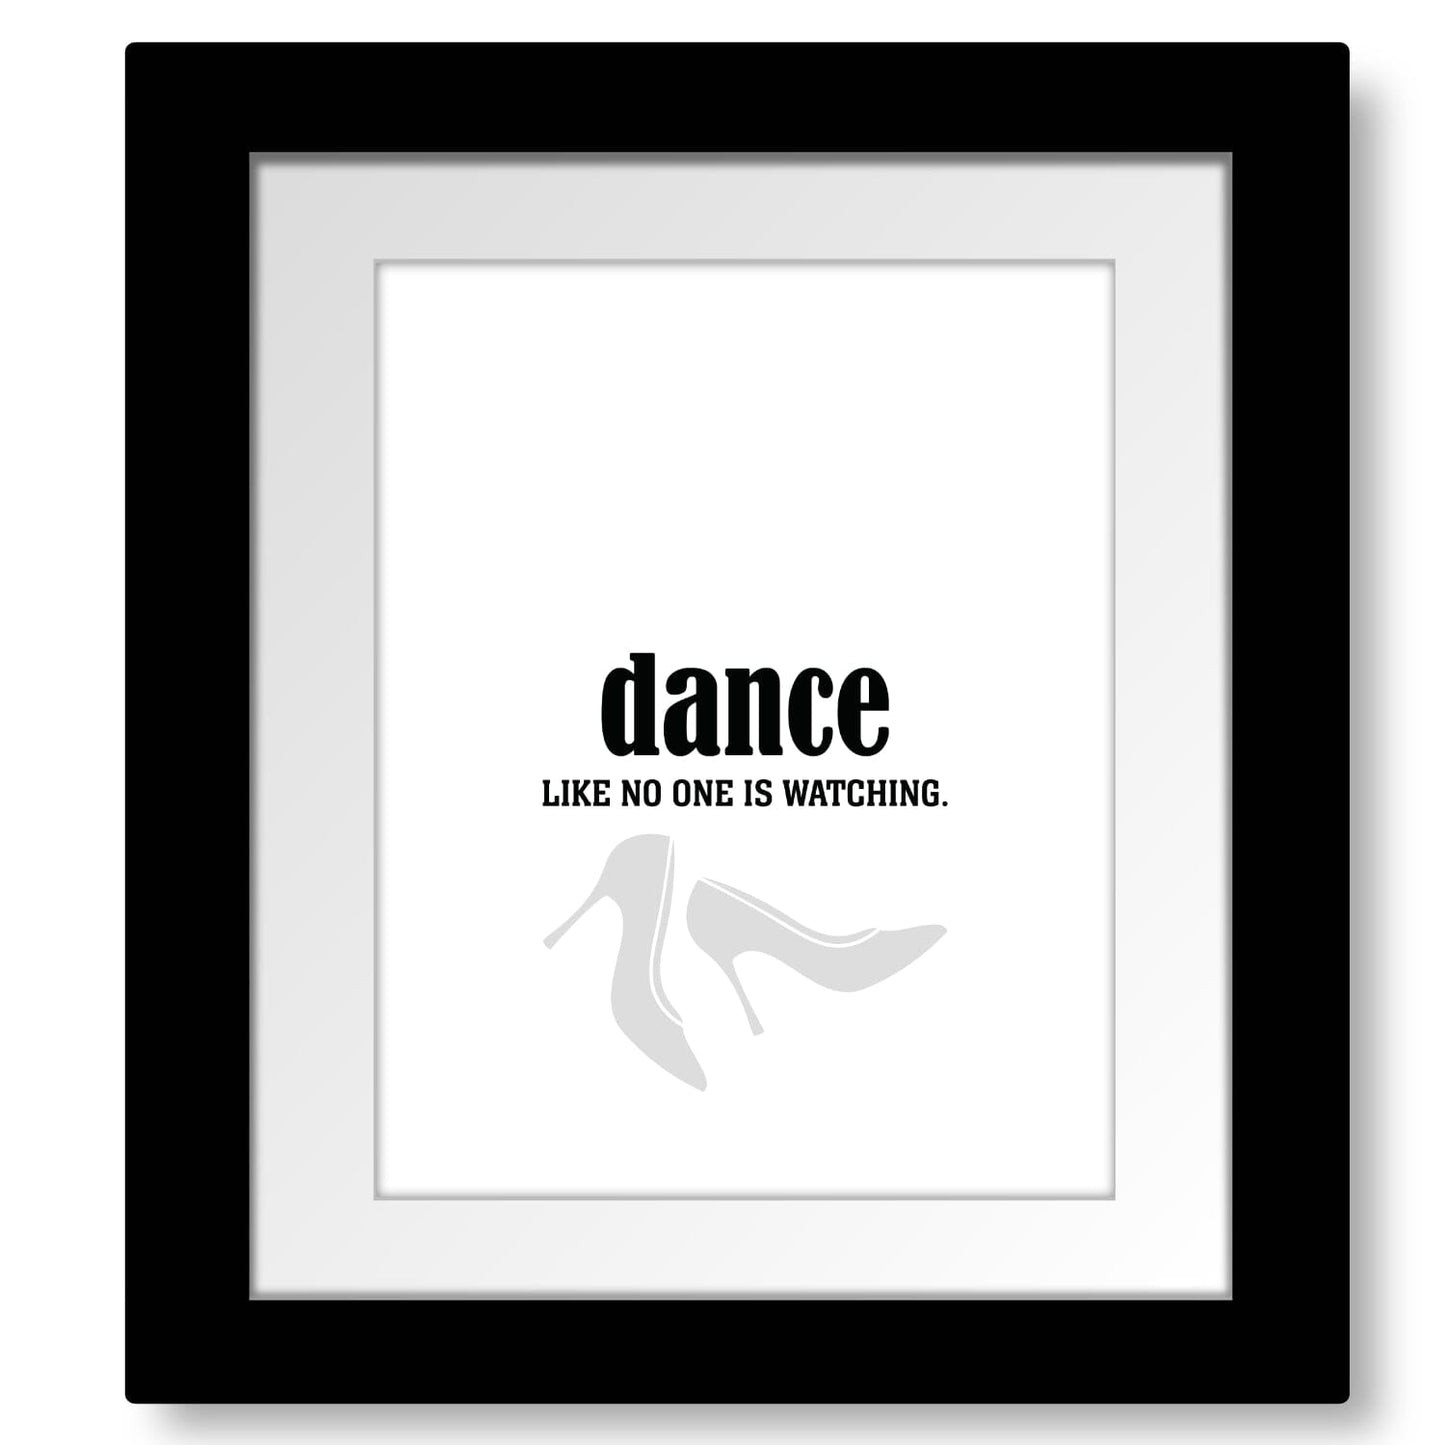 Dance Like No One is Watching - Wise and Witty Art Print Wise and Wiseass Quotes Song Lyrics Art 8x10 Framed and Matted Print 